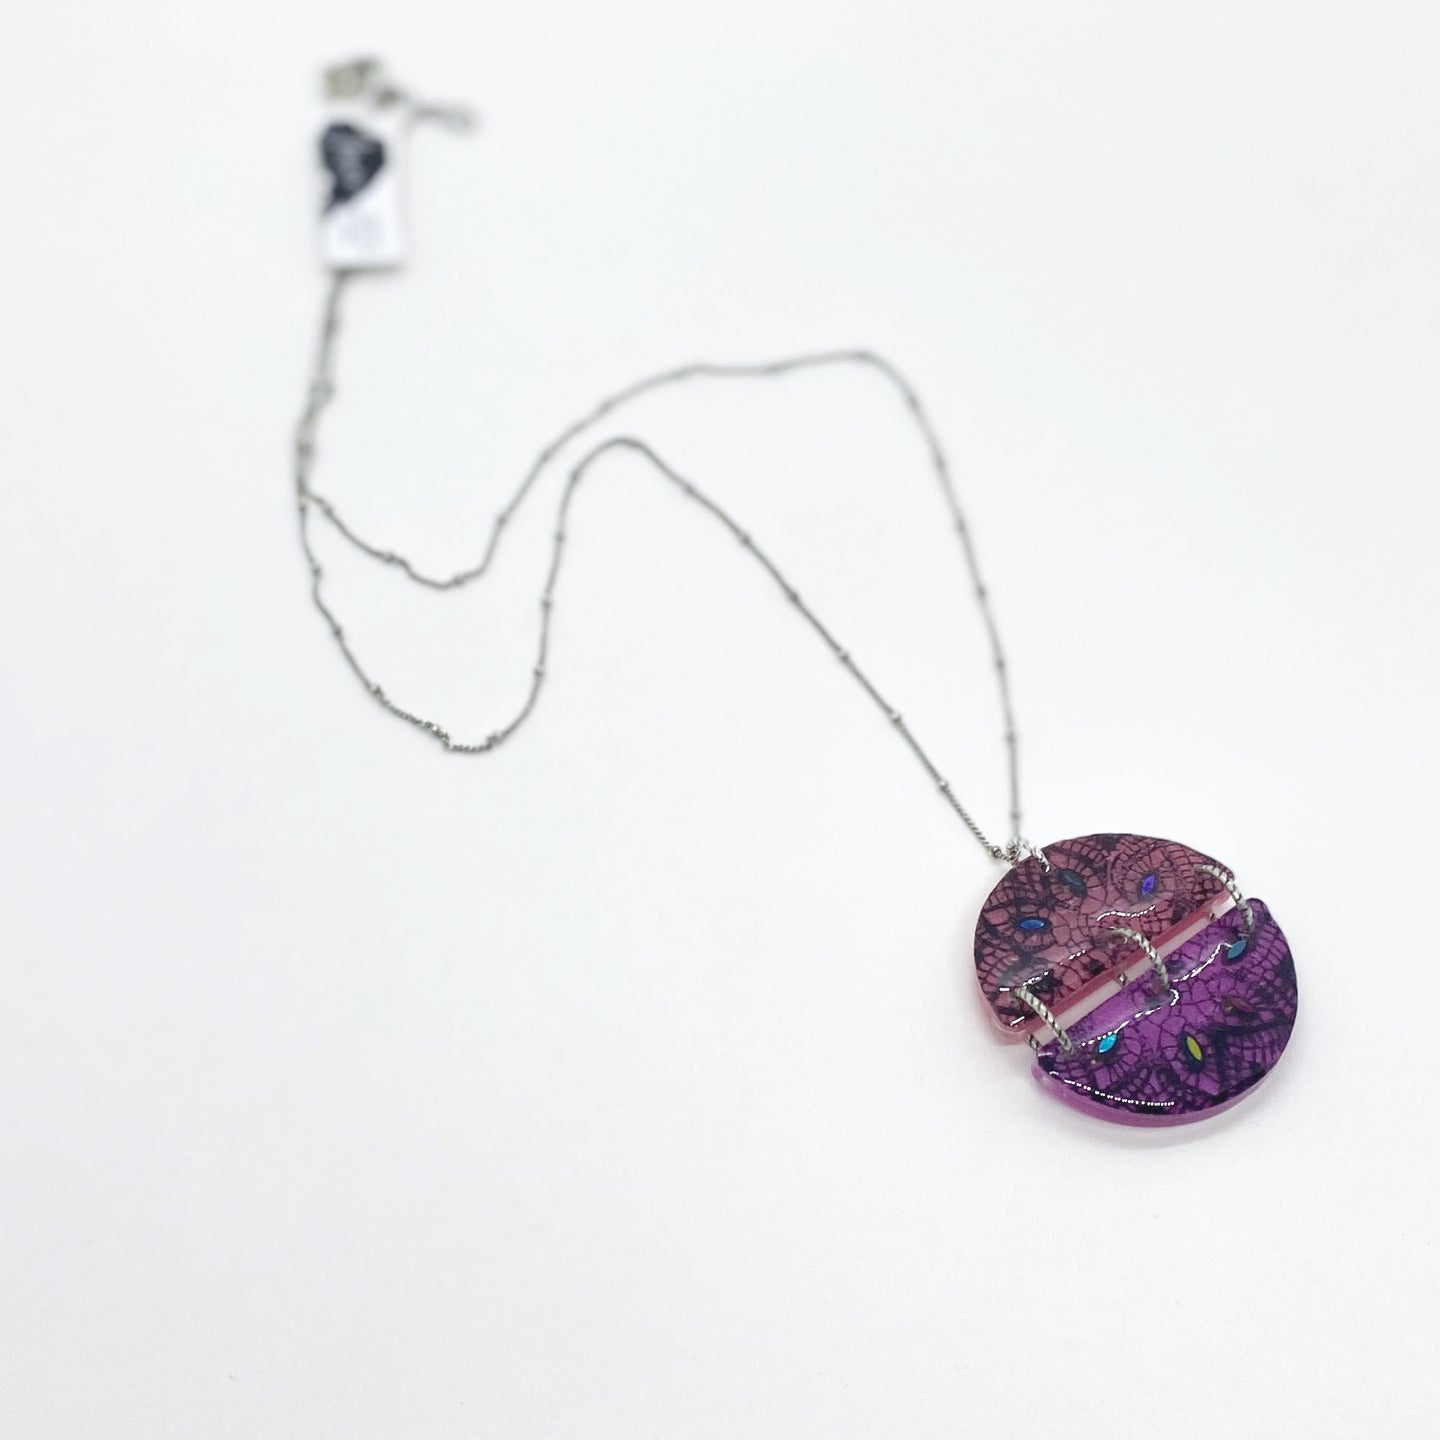 One of a Kind - Round Lace Resin Pendant Necklace